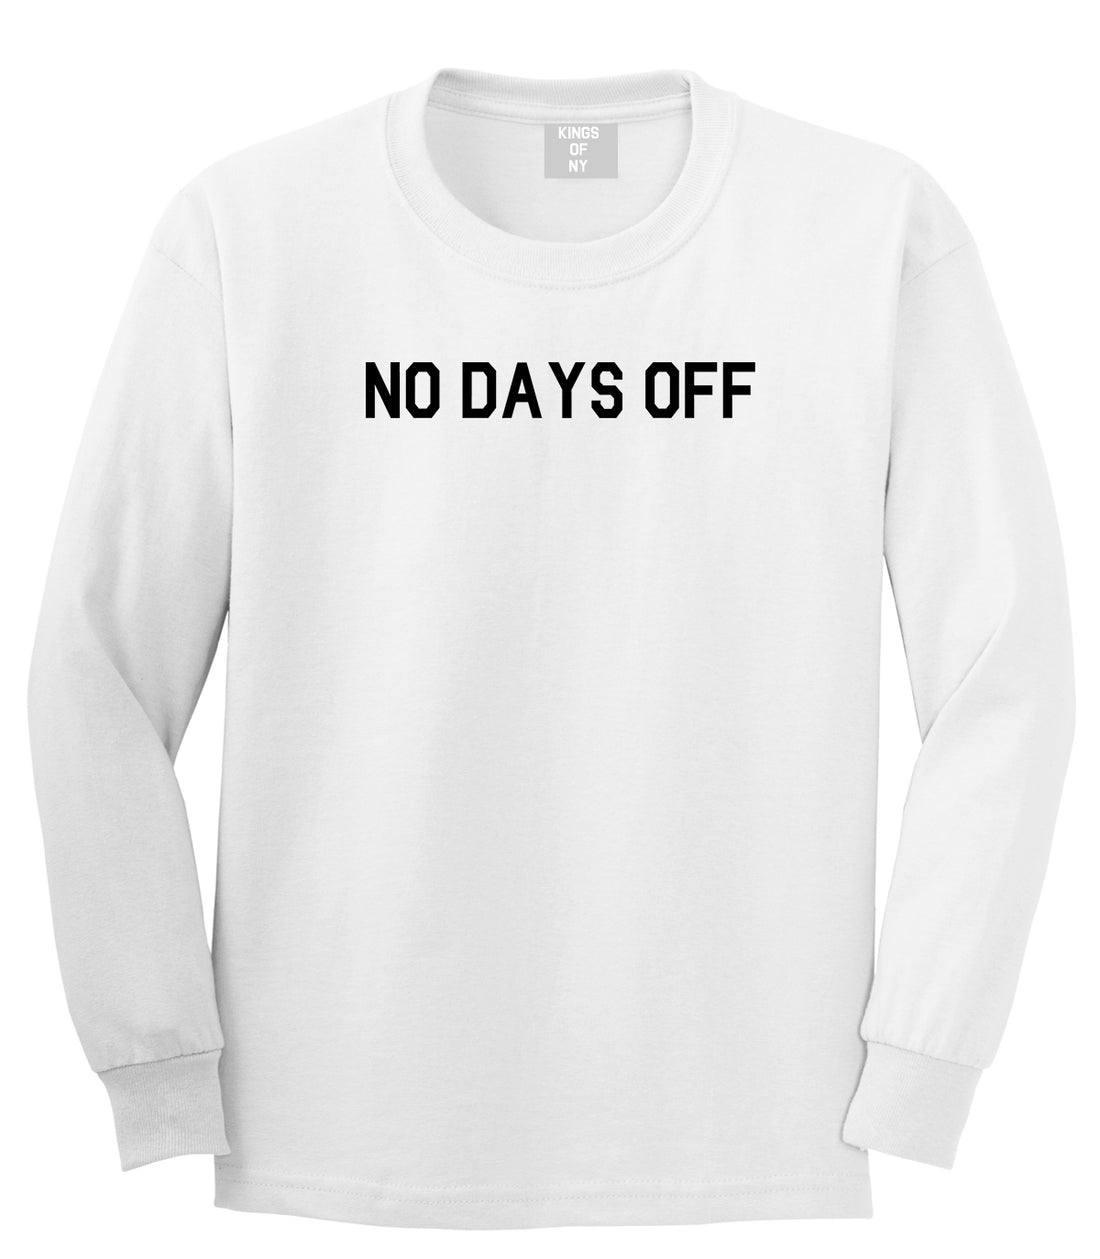 No Days Off Mens White Long Sleeve T-Shirt by Kings Of NY